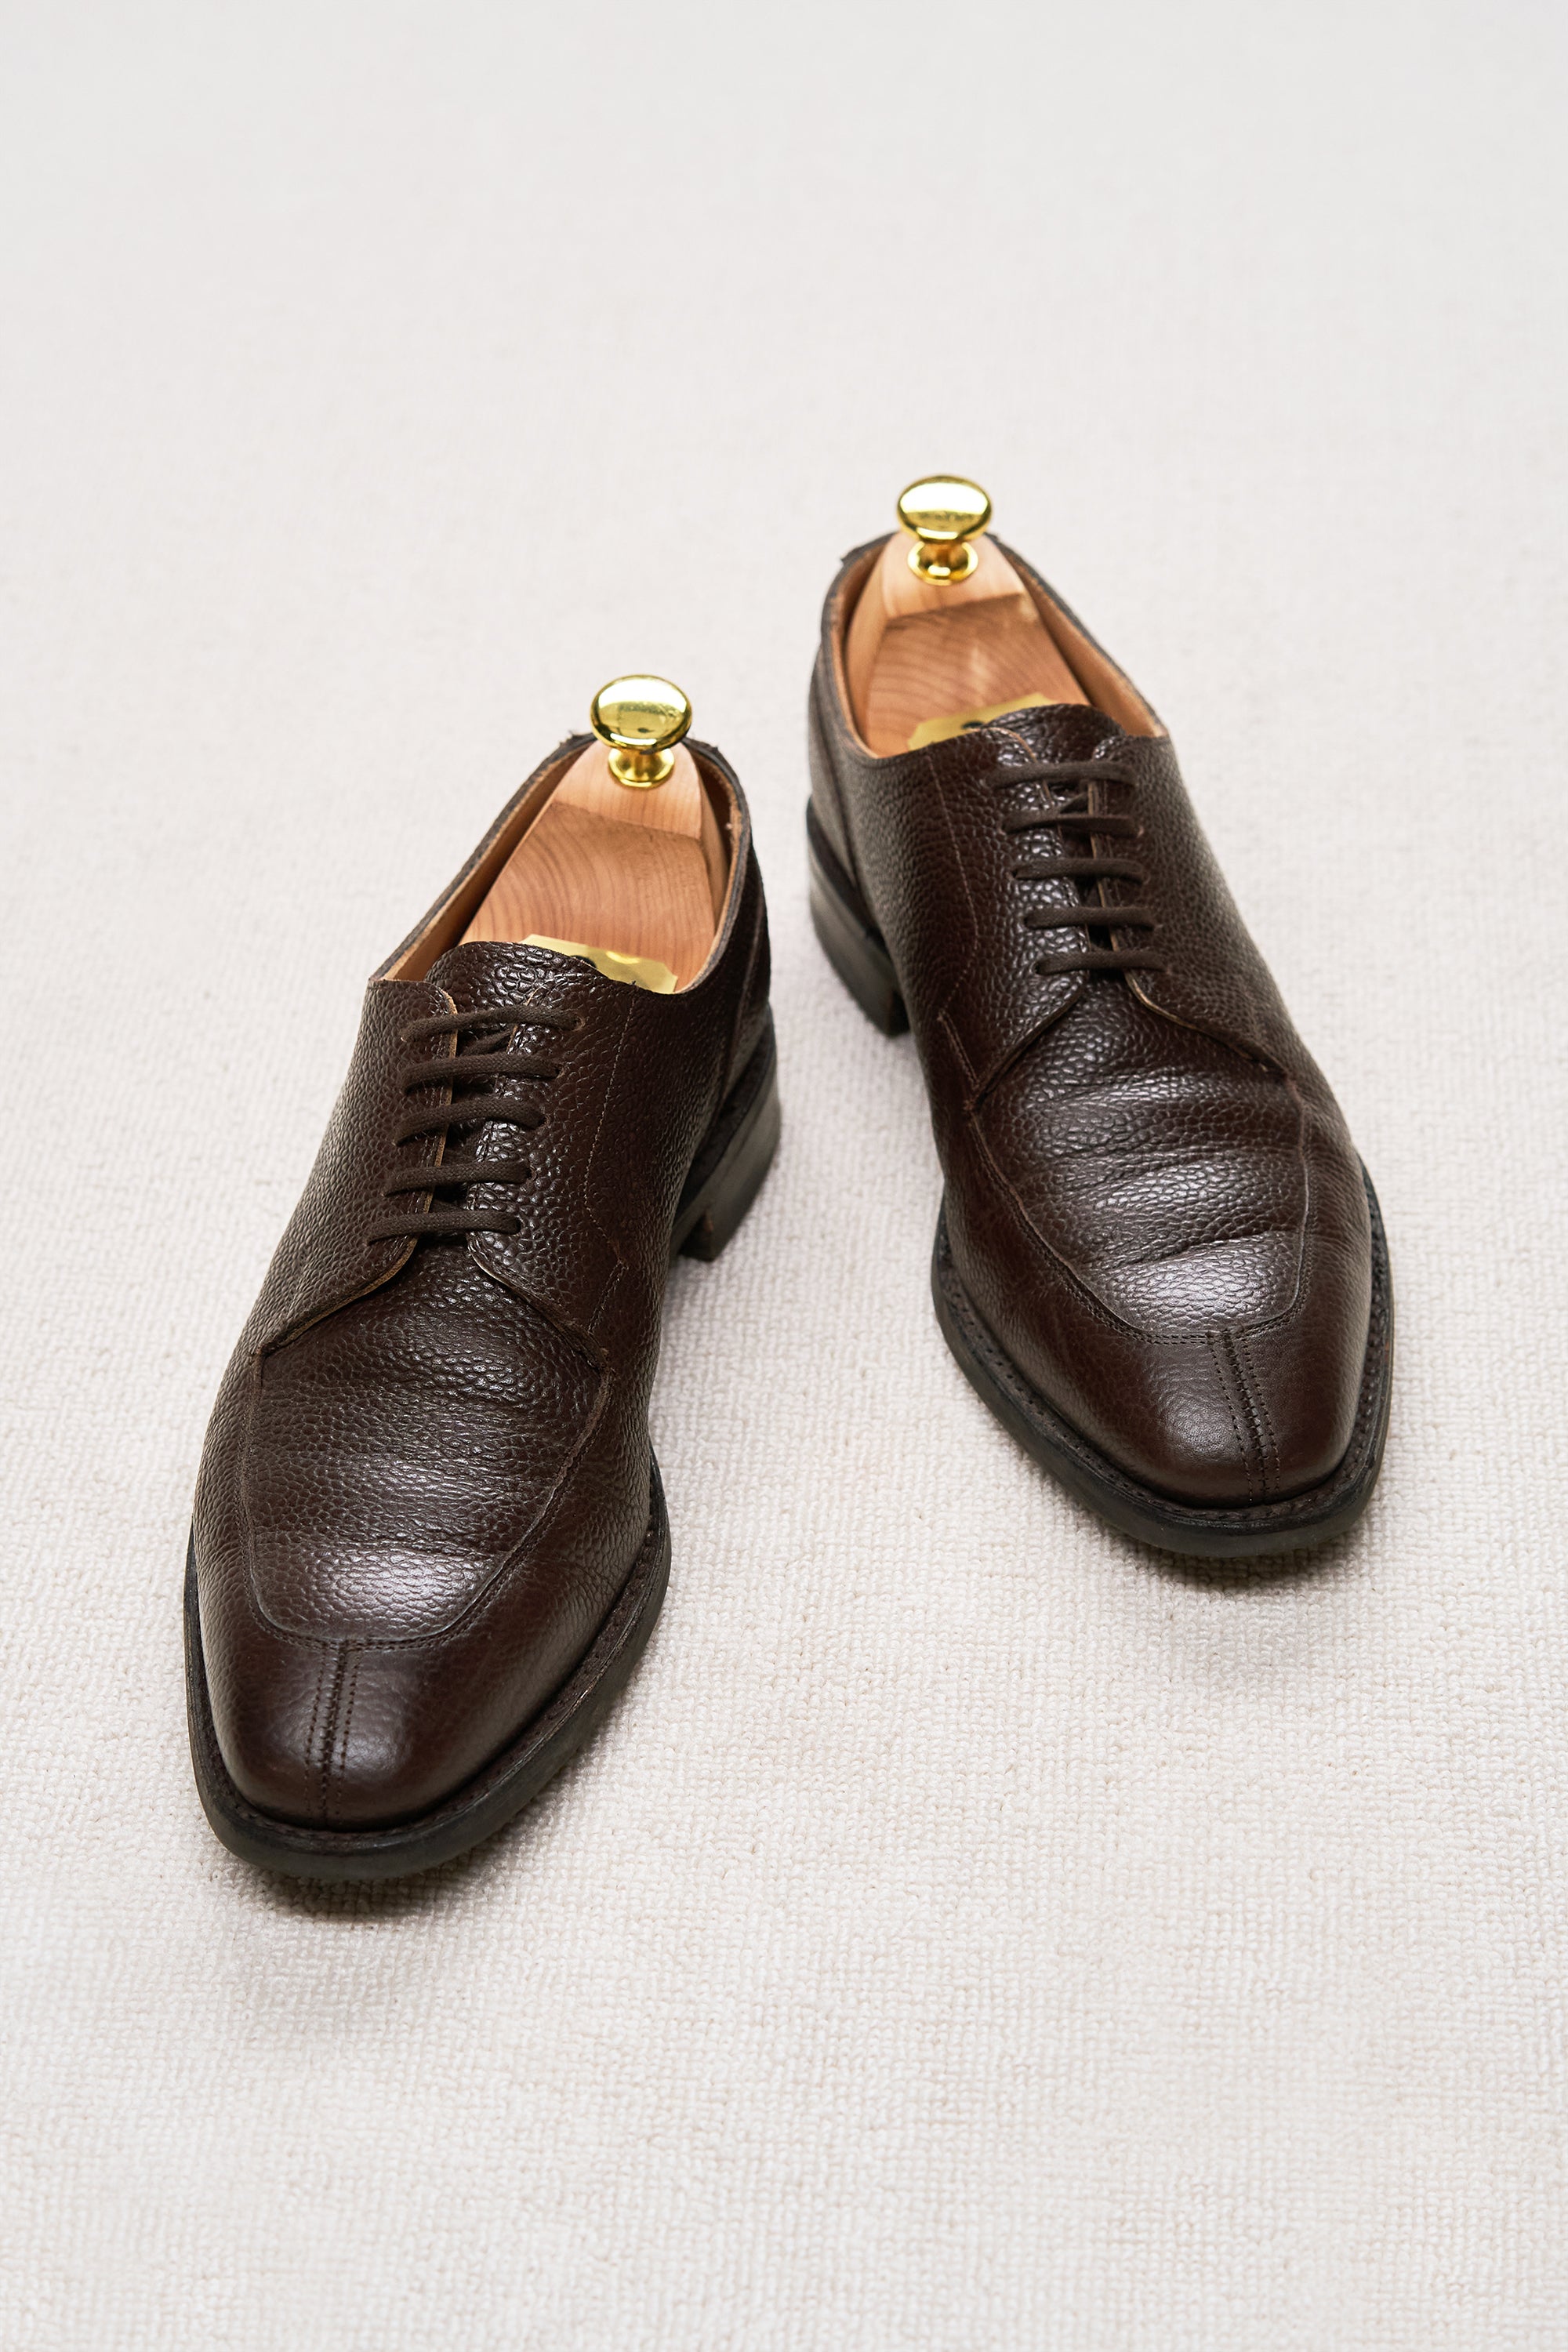 The Armoury Hajime 101808 Jubilee Dark Brown Grained Leather Derby Shoes